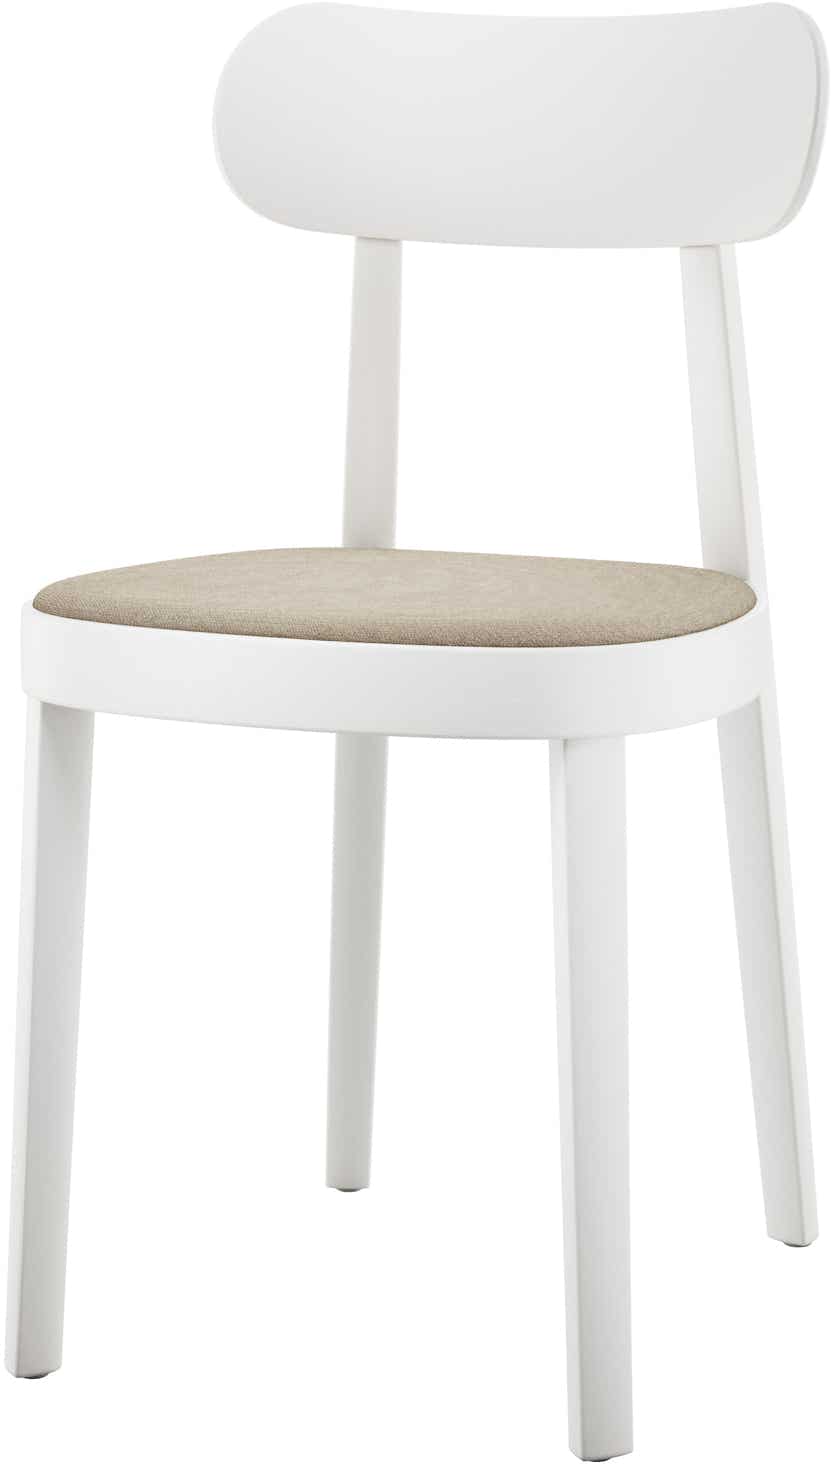 118 SP / 118 SPF Chair (upholstered seat)